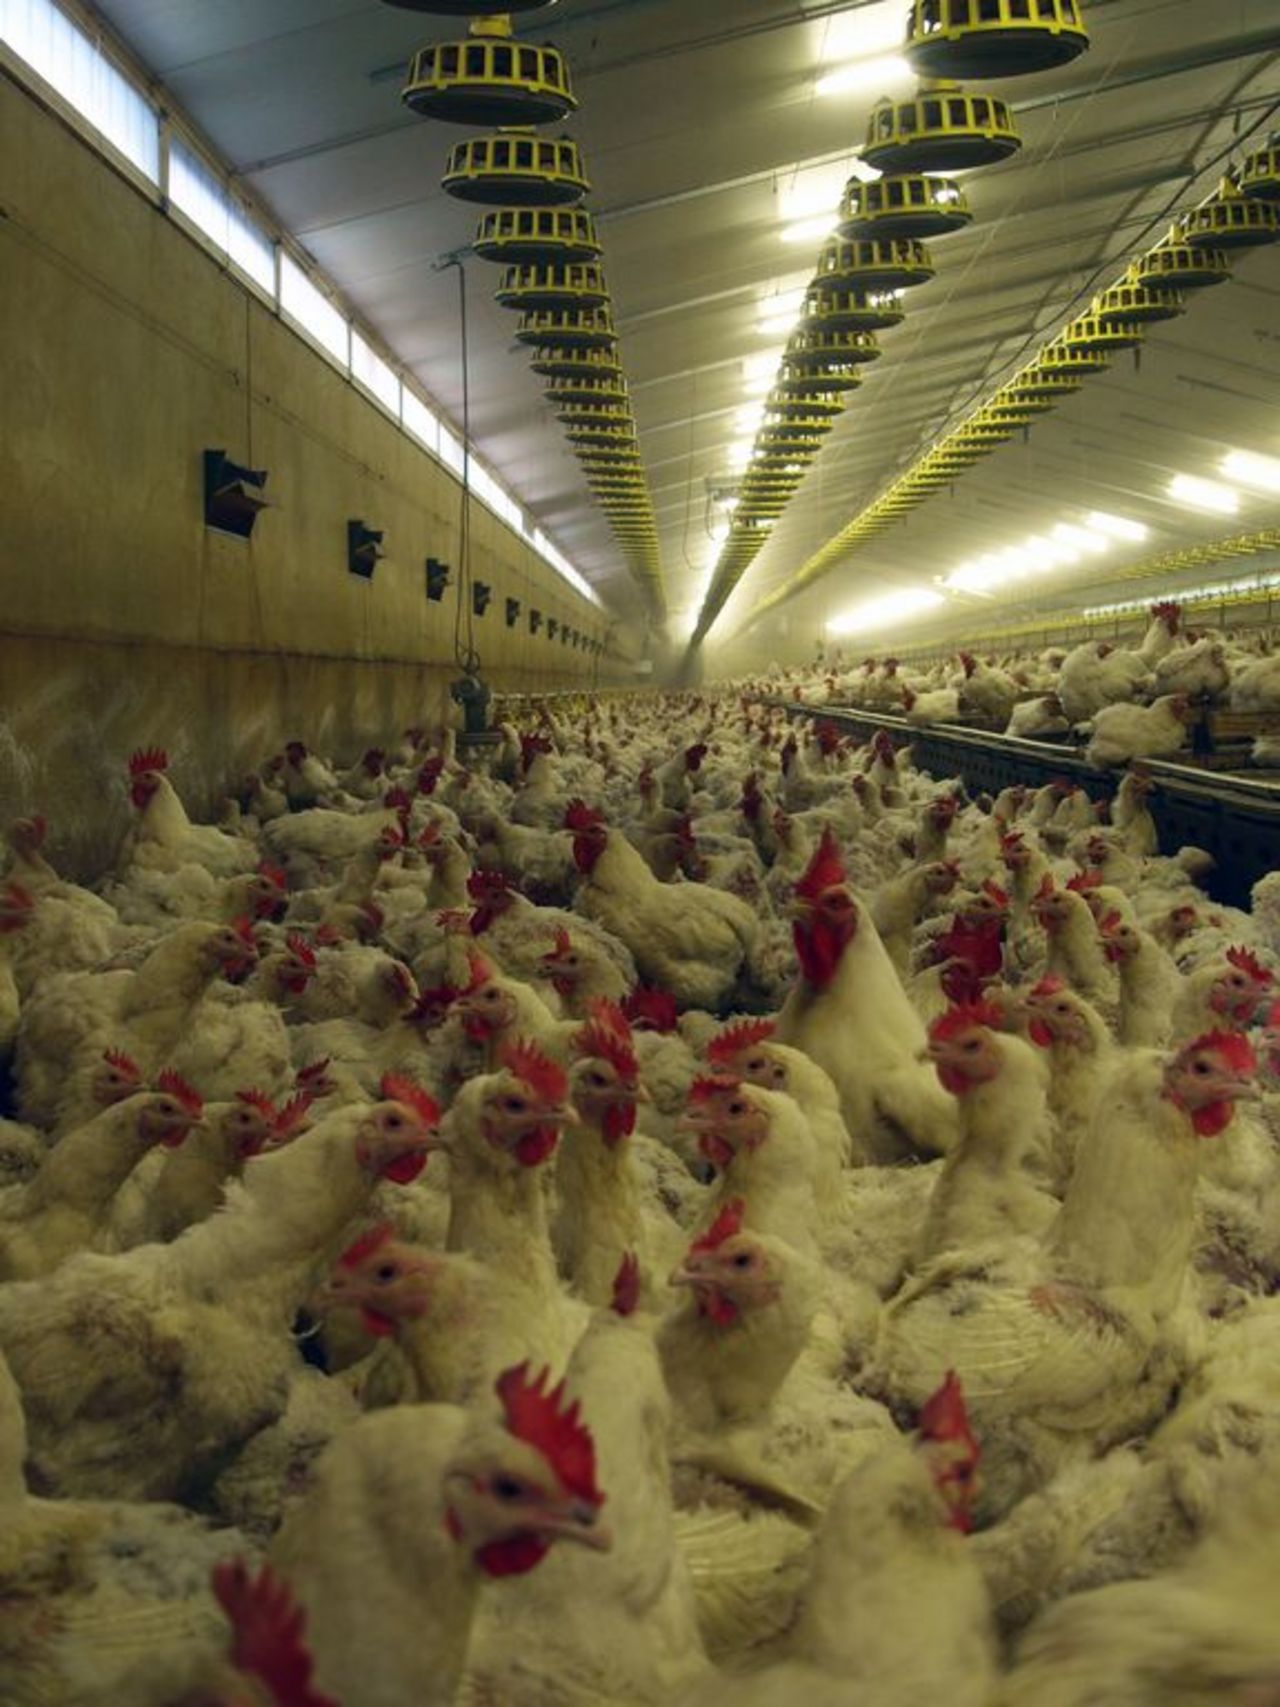 Inside a poultry house